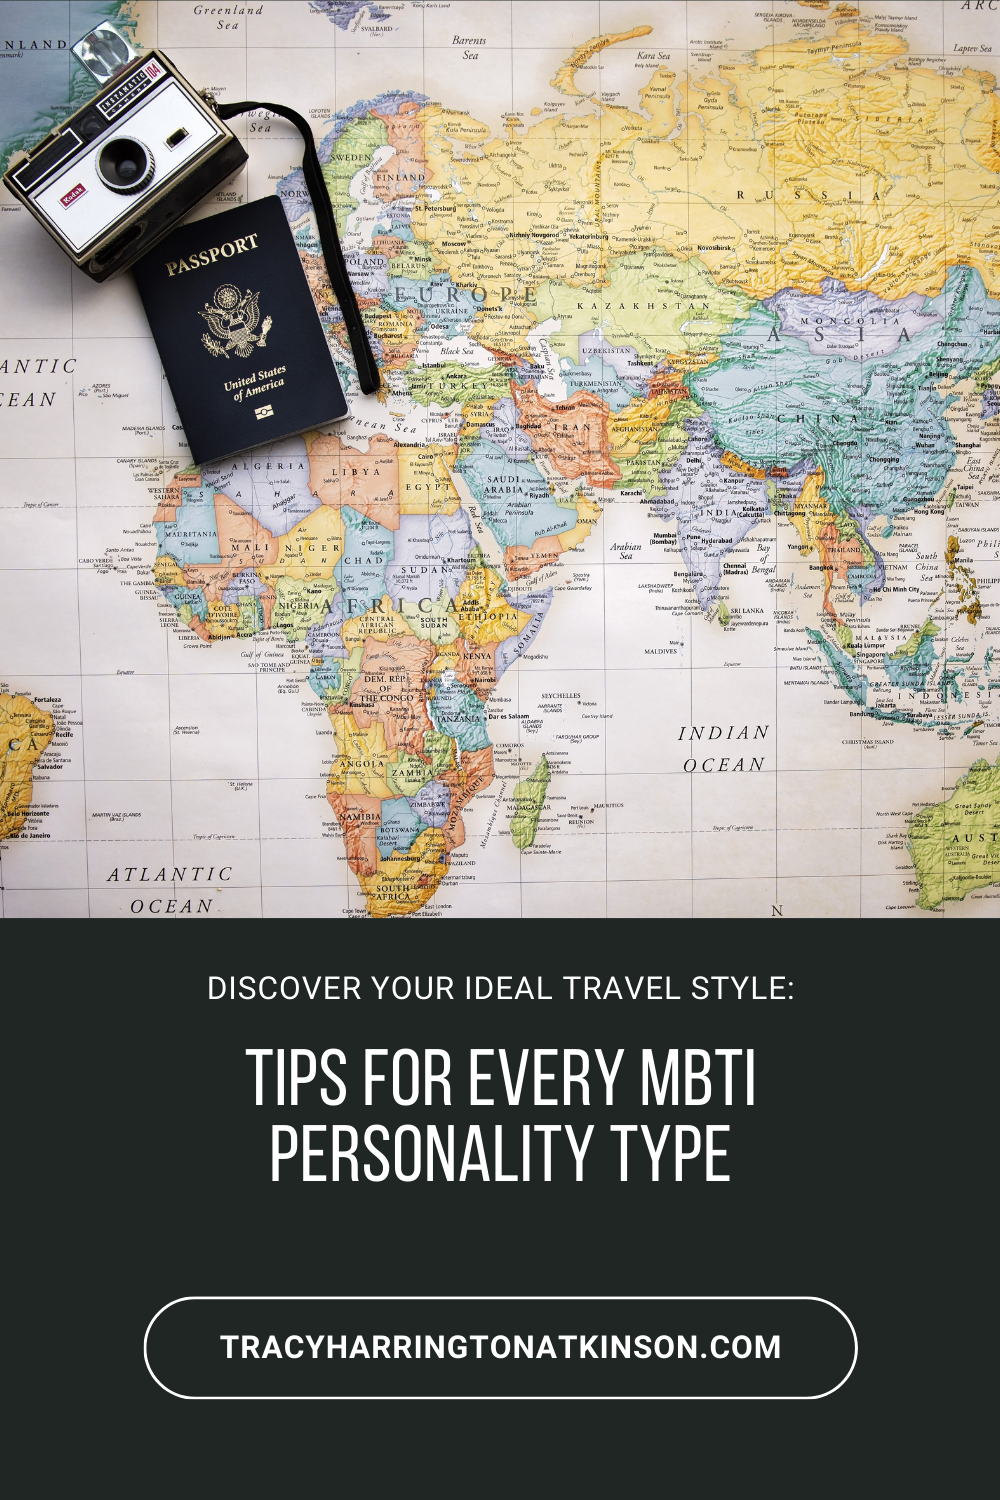 Travel for Each Personality Type